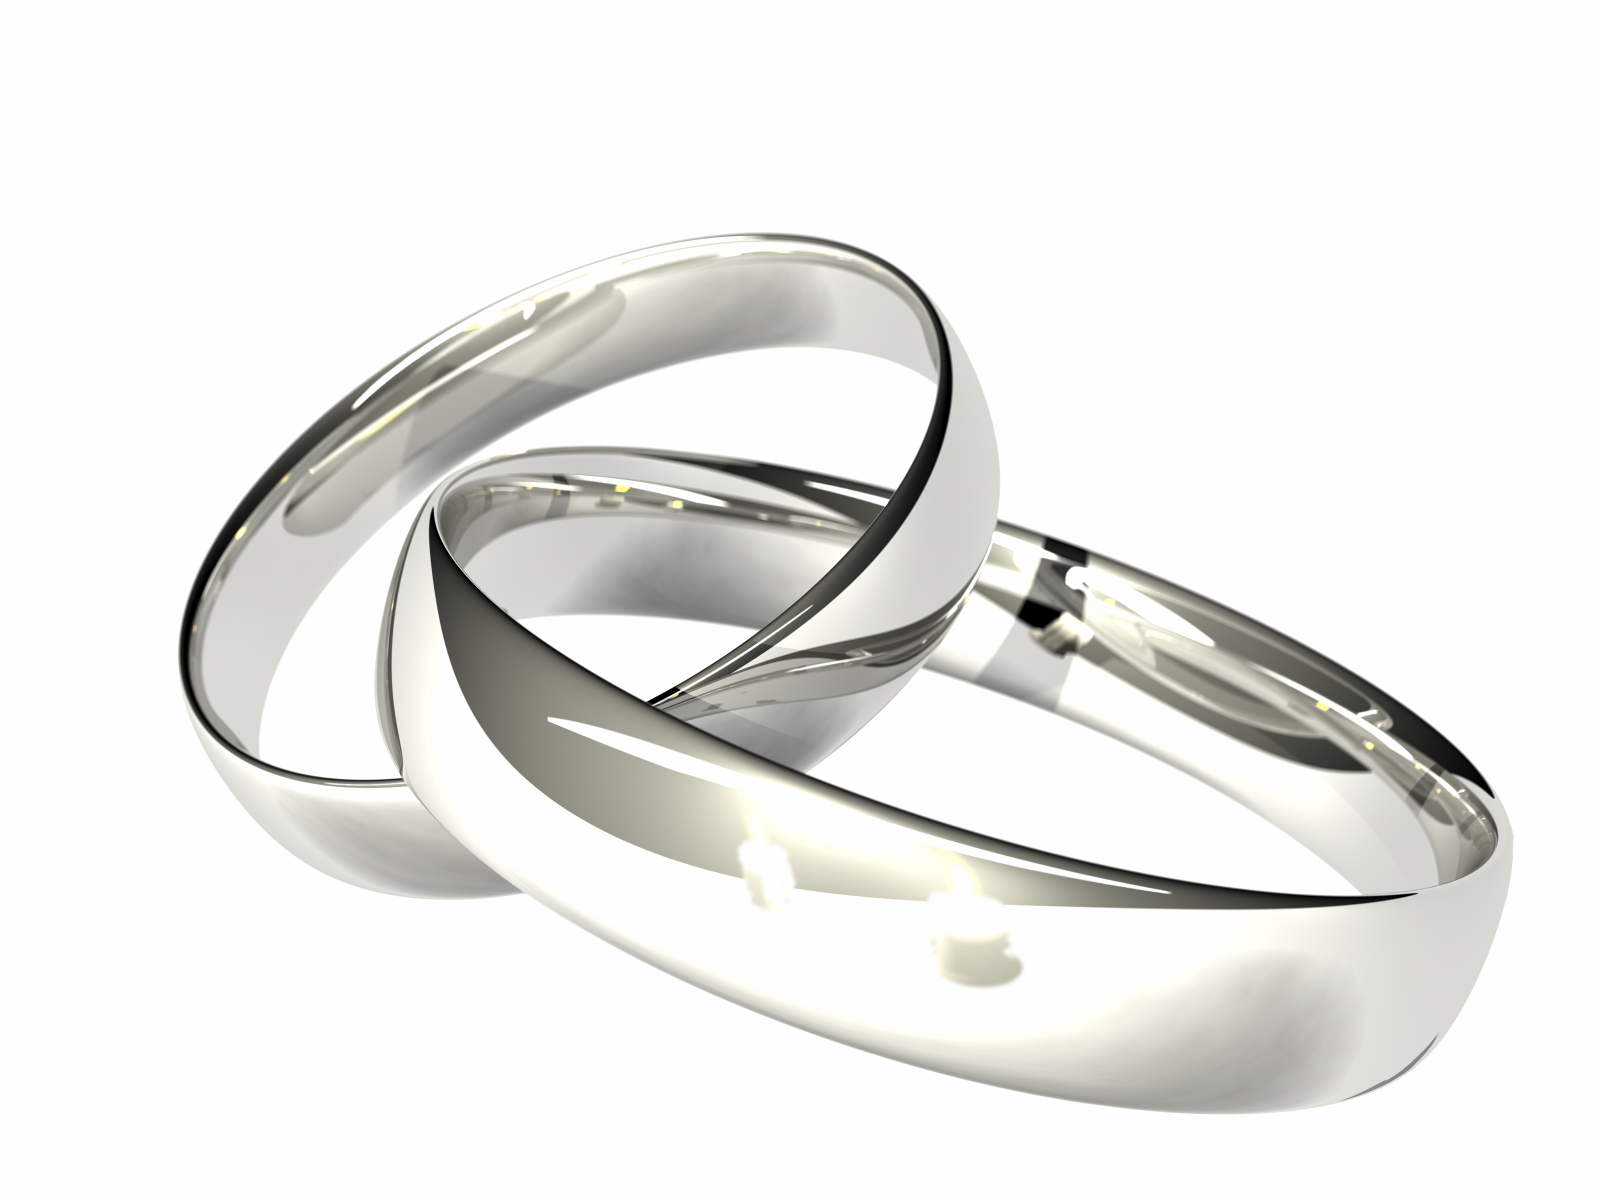 Wedding Pictures Wedding Photos: Silver Wedding Rings Pictures